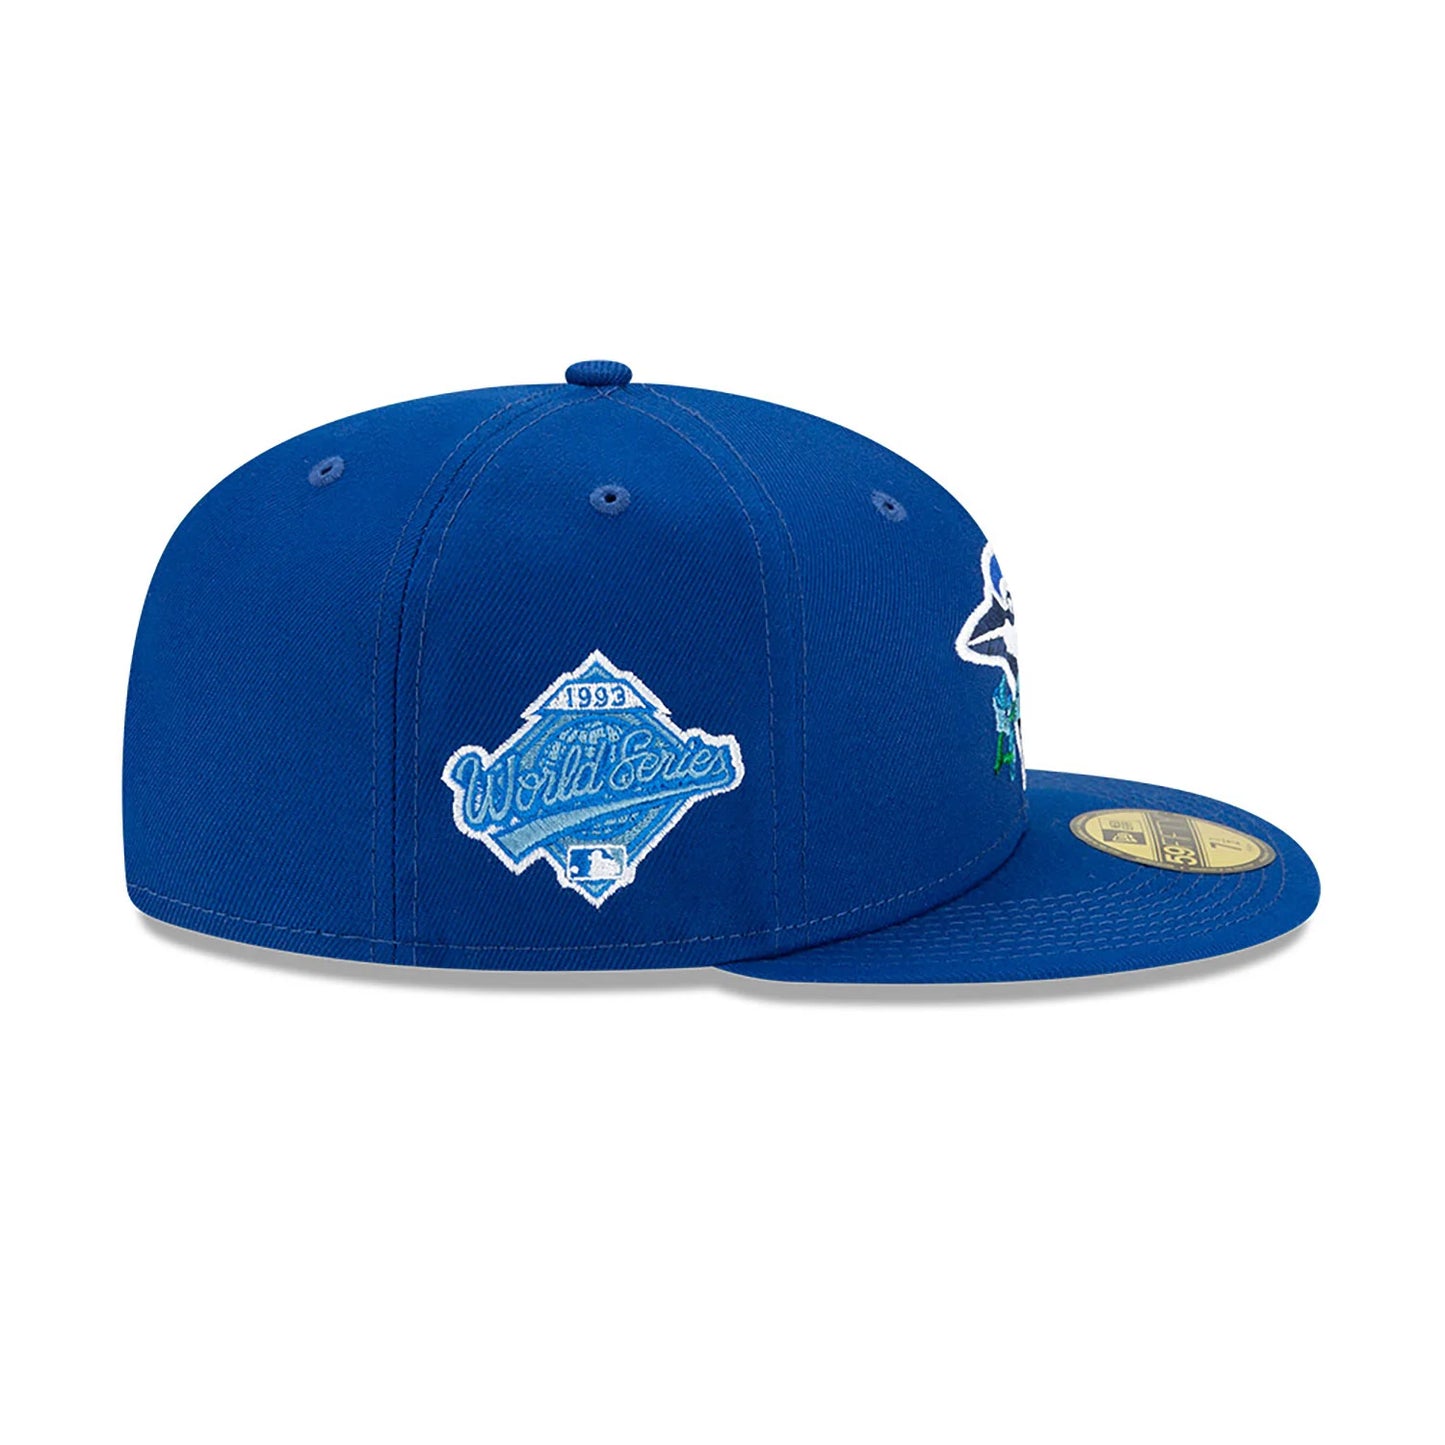 NEW ERA Toronto Blue Jays Side Patch Bloom Blue 59FIFTY Fitted Cap